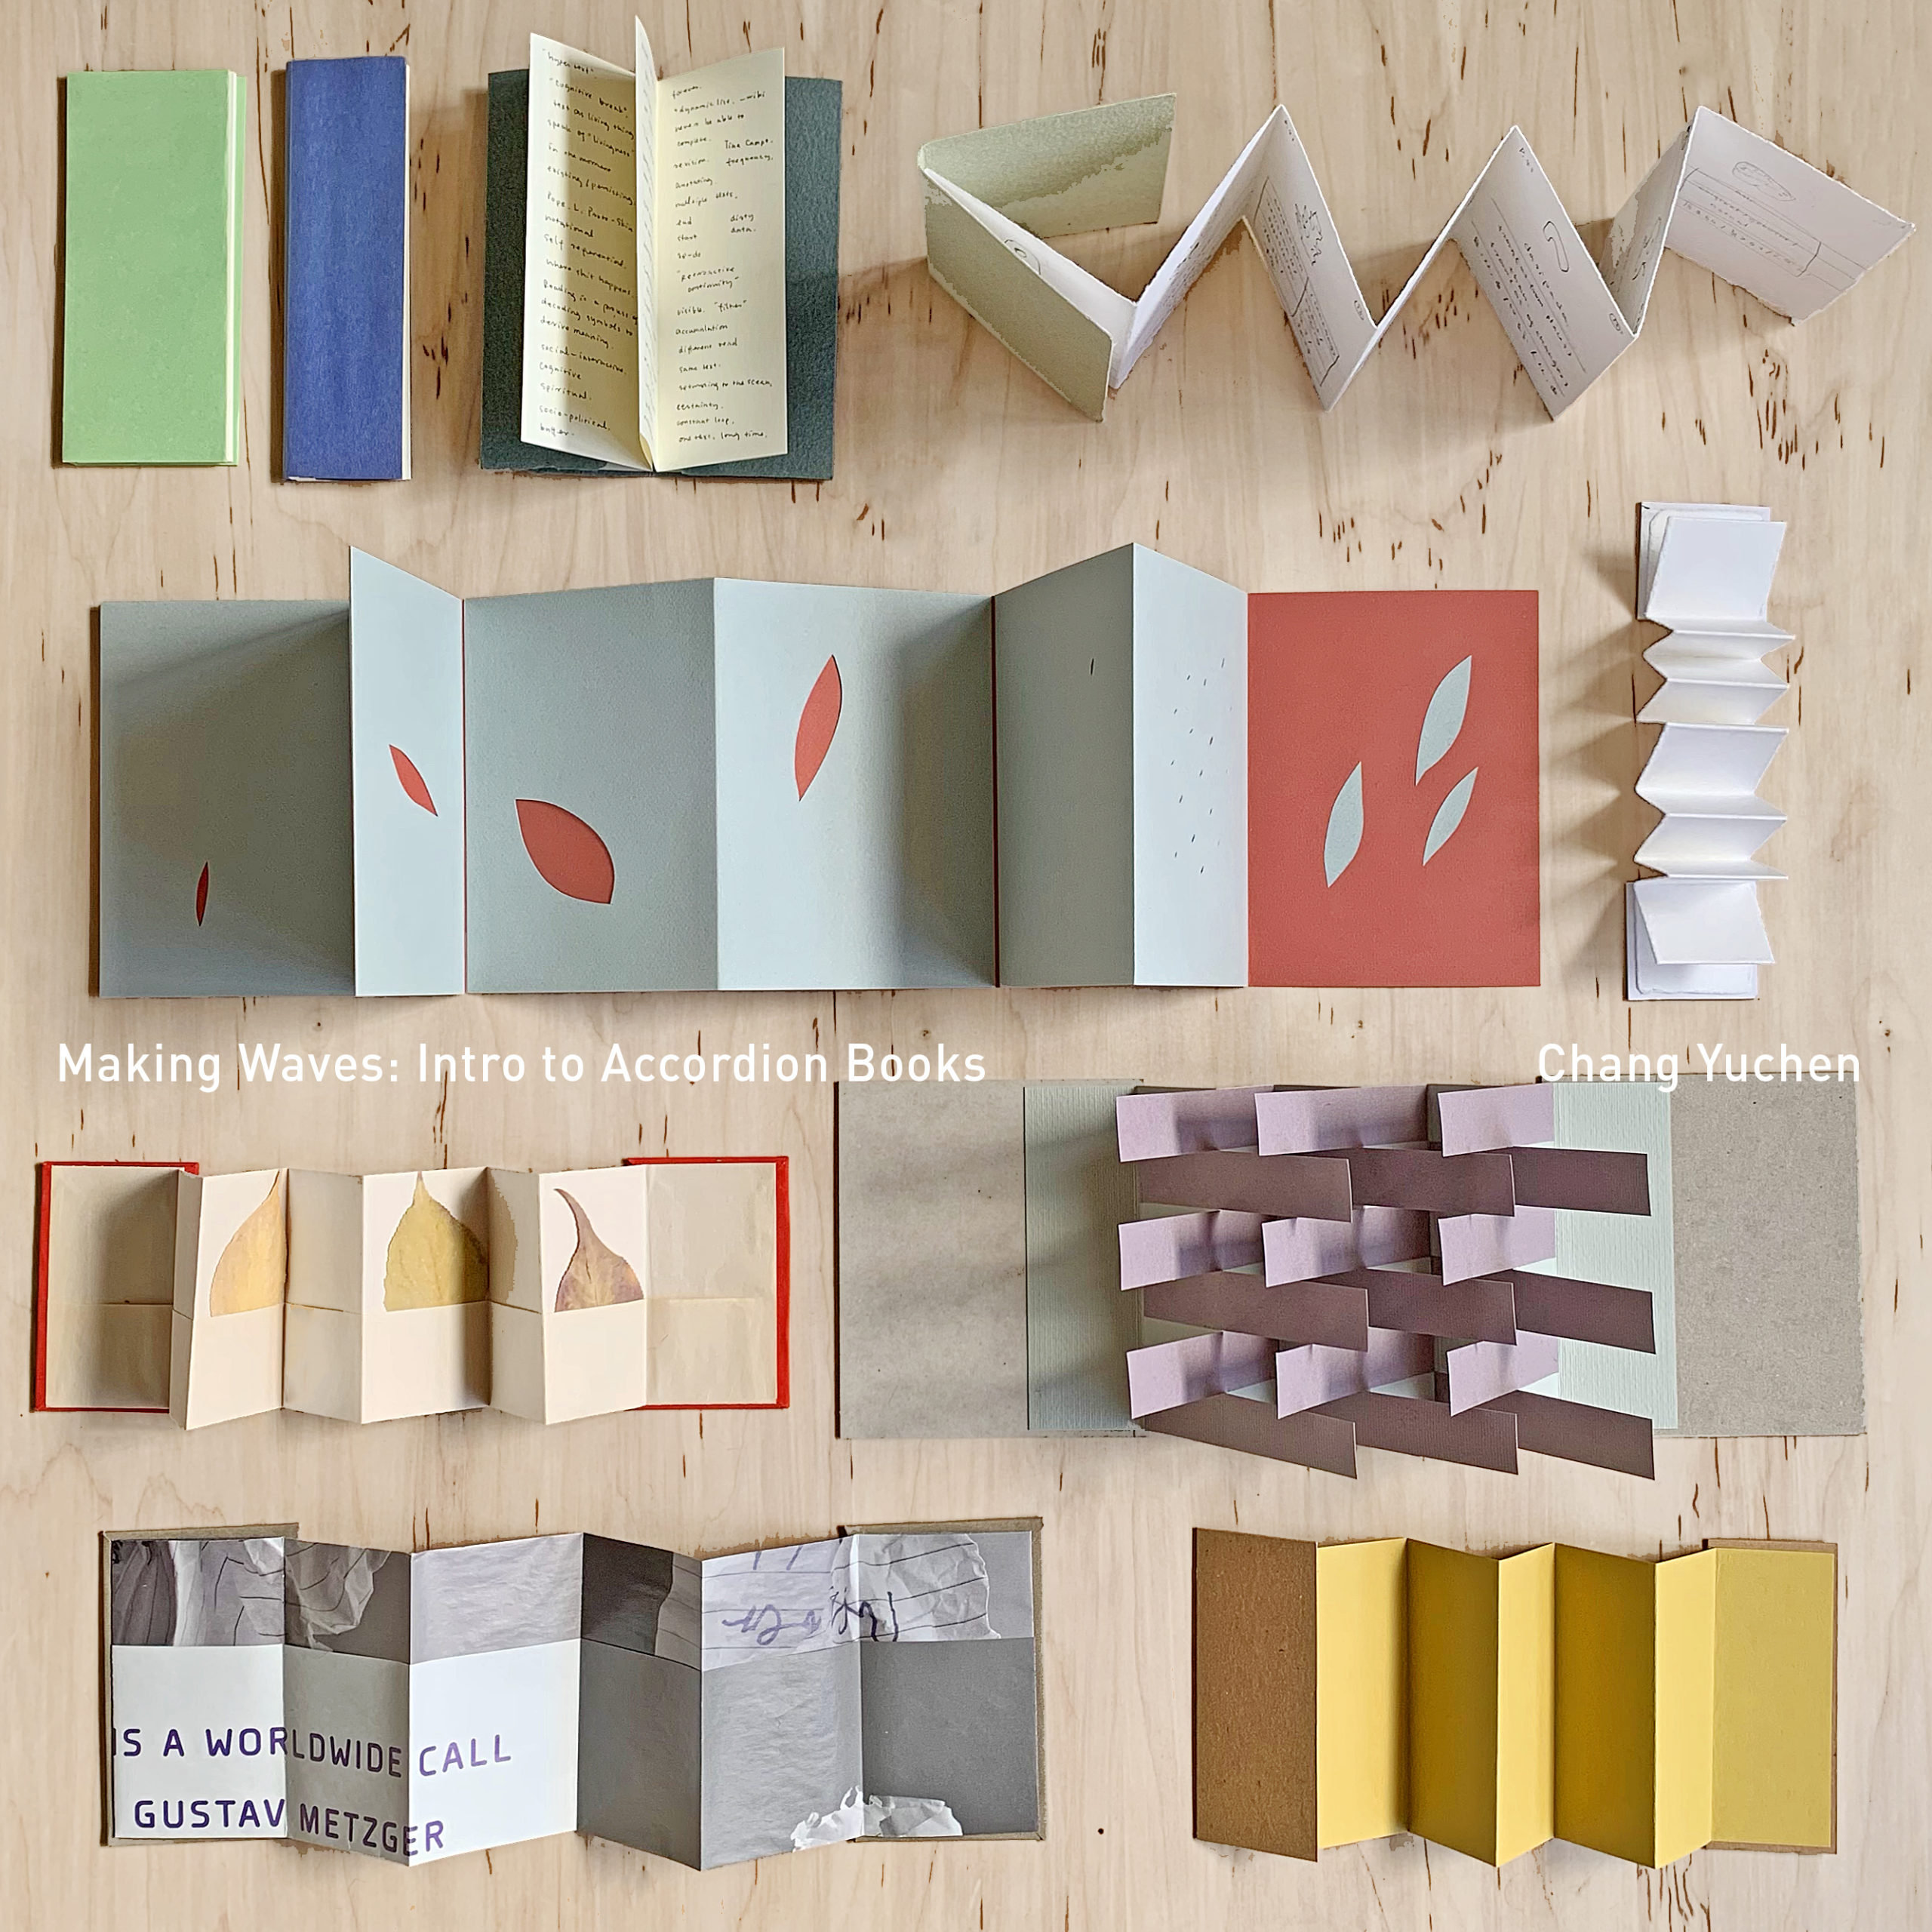 Making Waves: Intro to the Accordion Book (Fall 2021) - Center for Book Arts